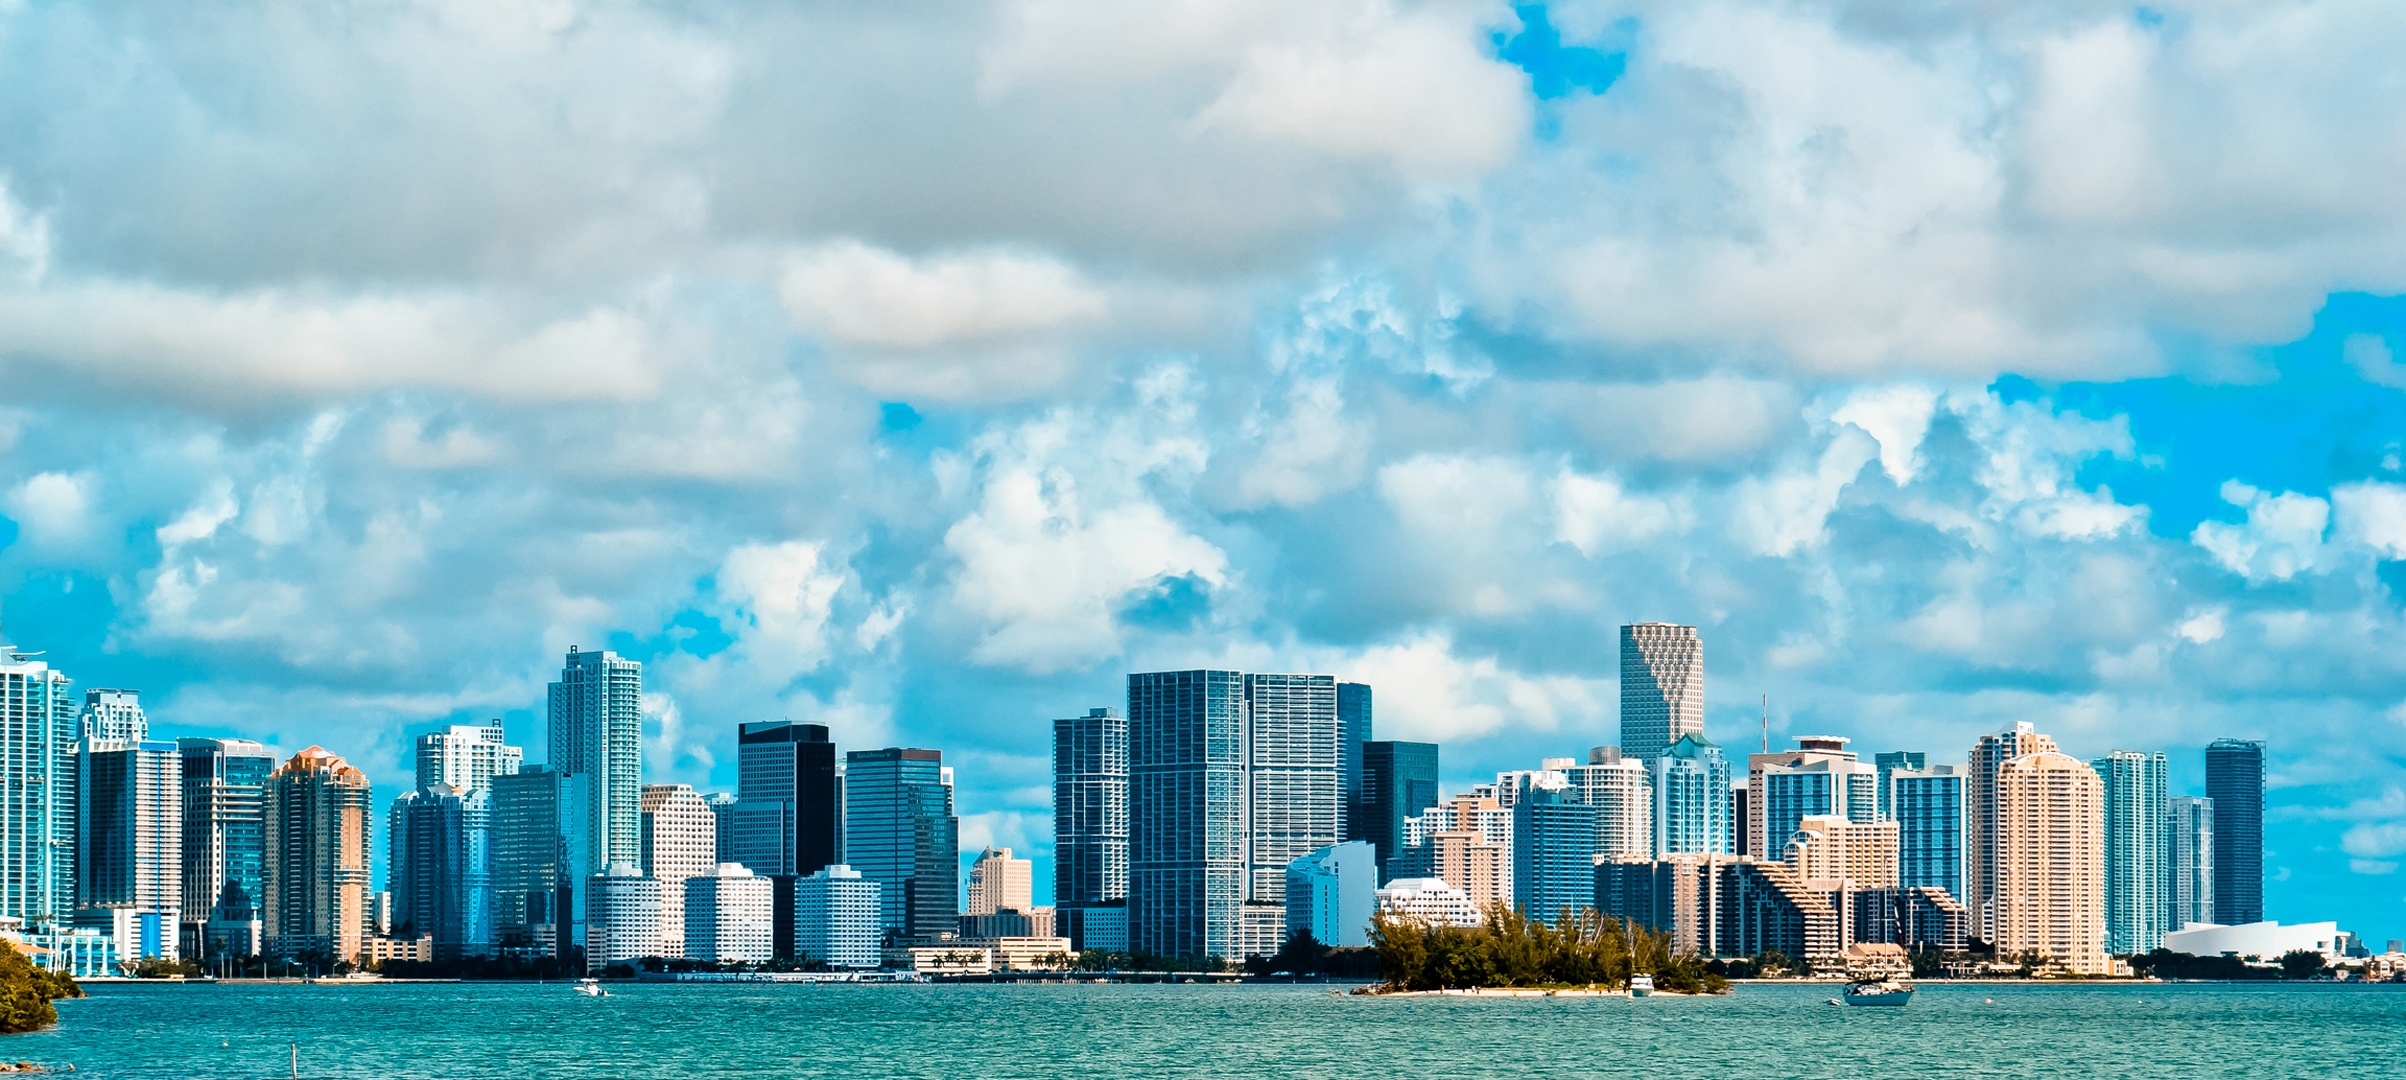 america, miami, building, miami beach, usa, high rise buildings, united states, cities, sky, clouds, florida download HD wallpaper